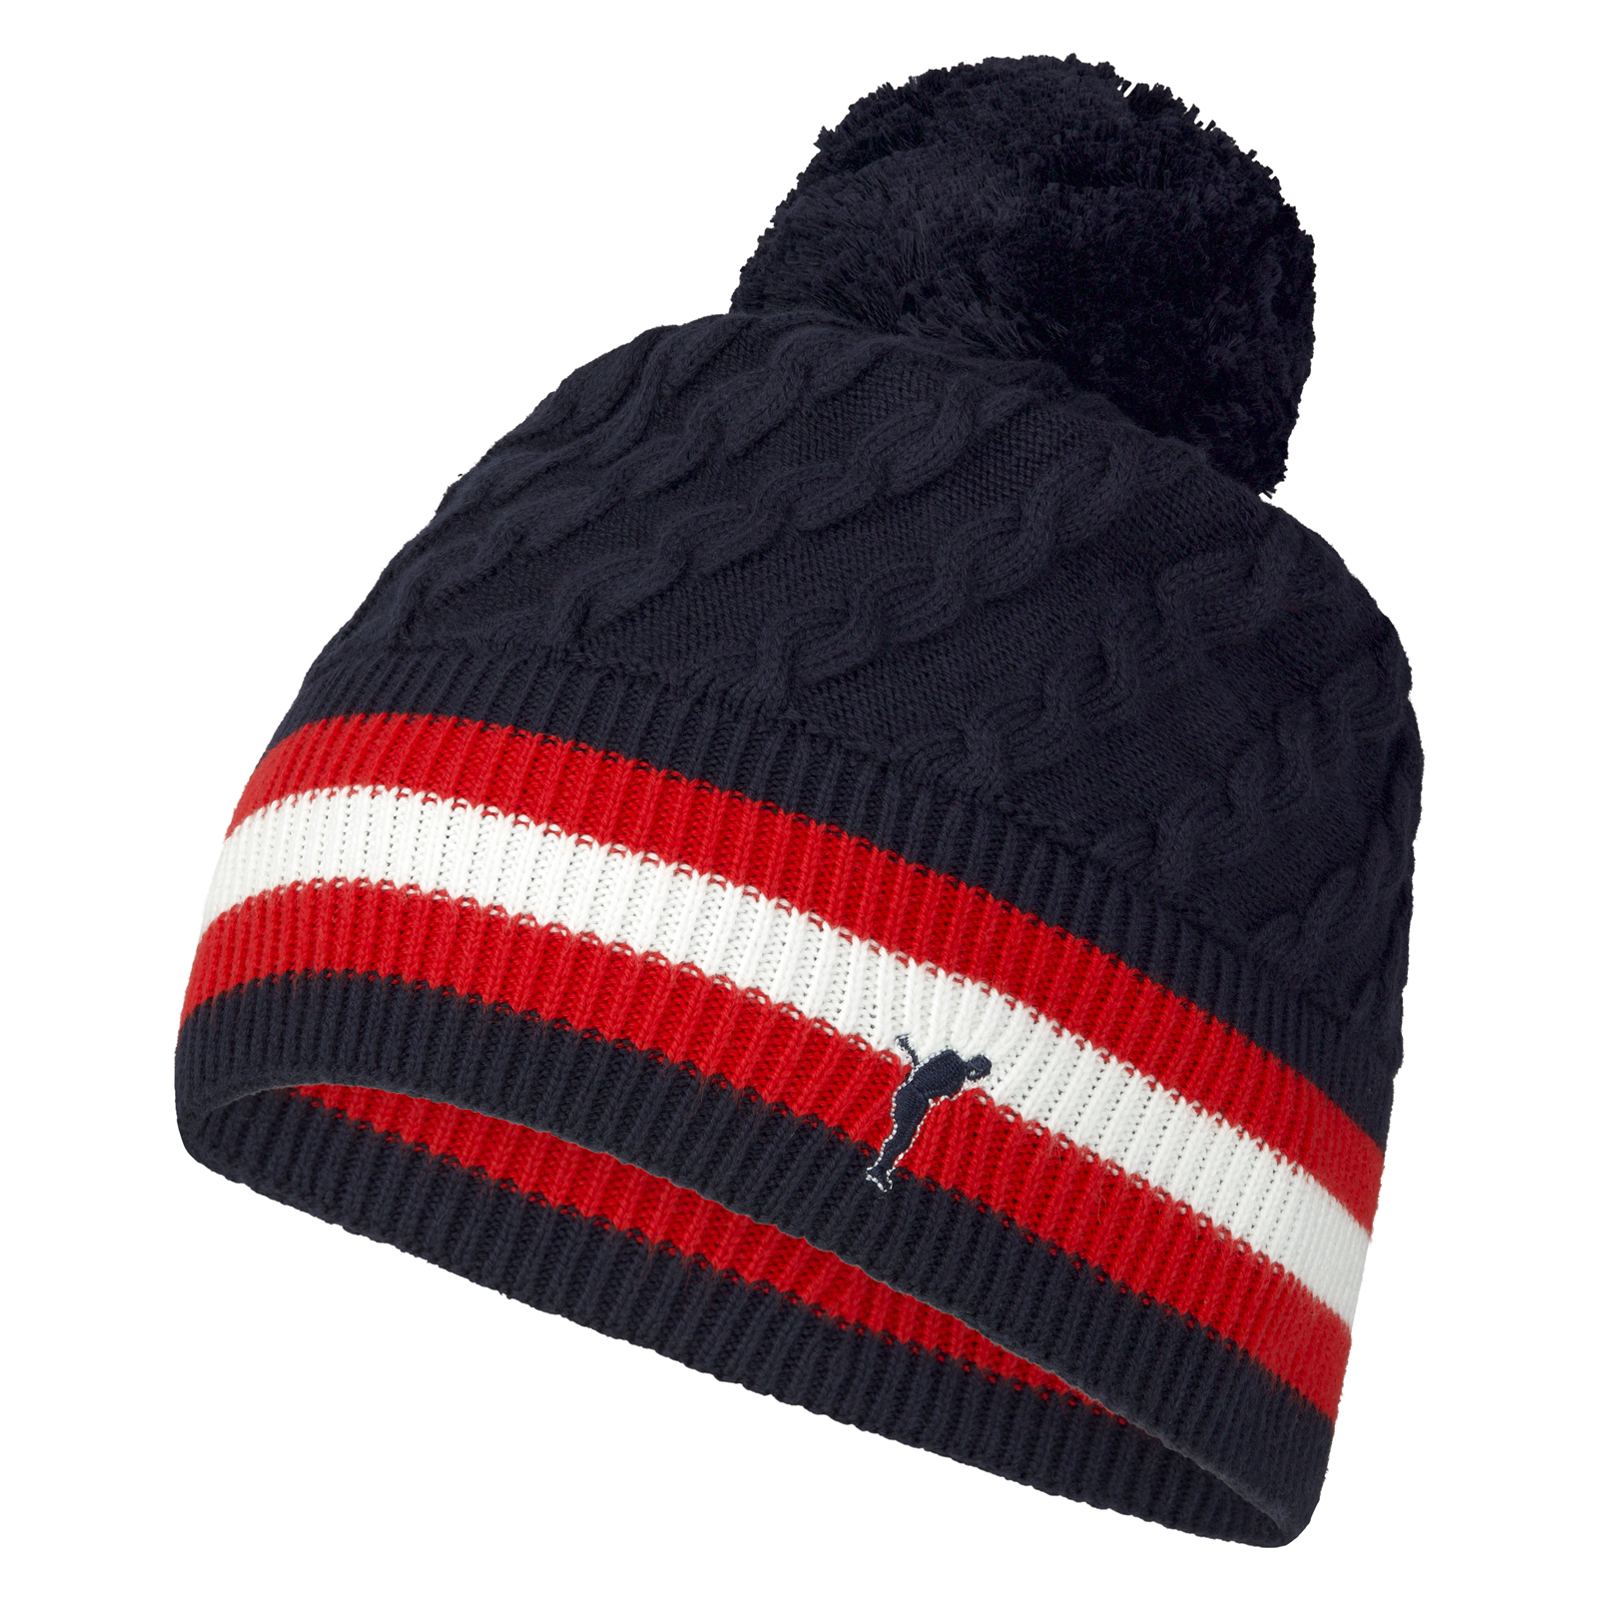 Ladies' knitted pompom hat in organic cotton with cashmere